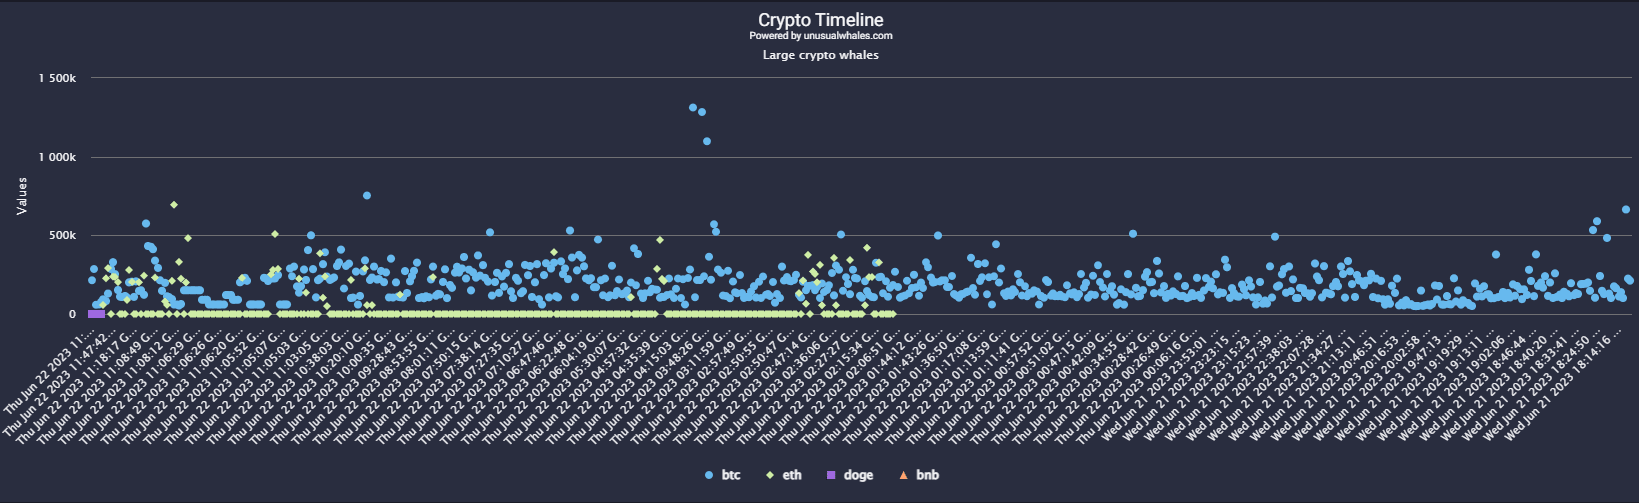 Unusual Whales' Large Crypto Whales Chart